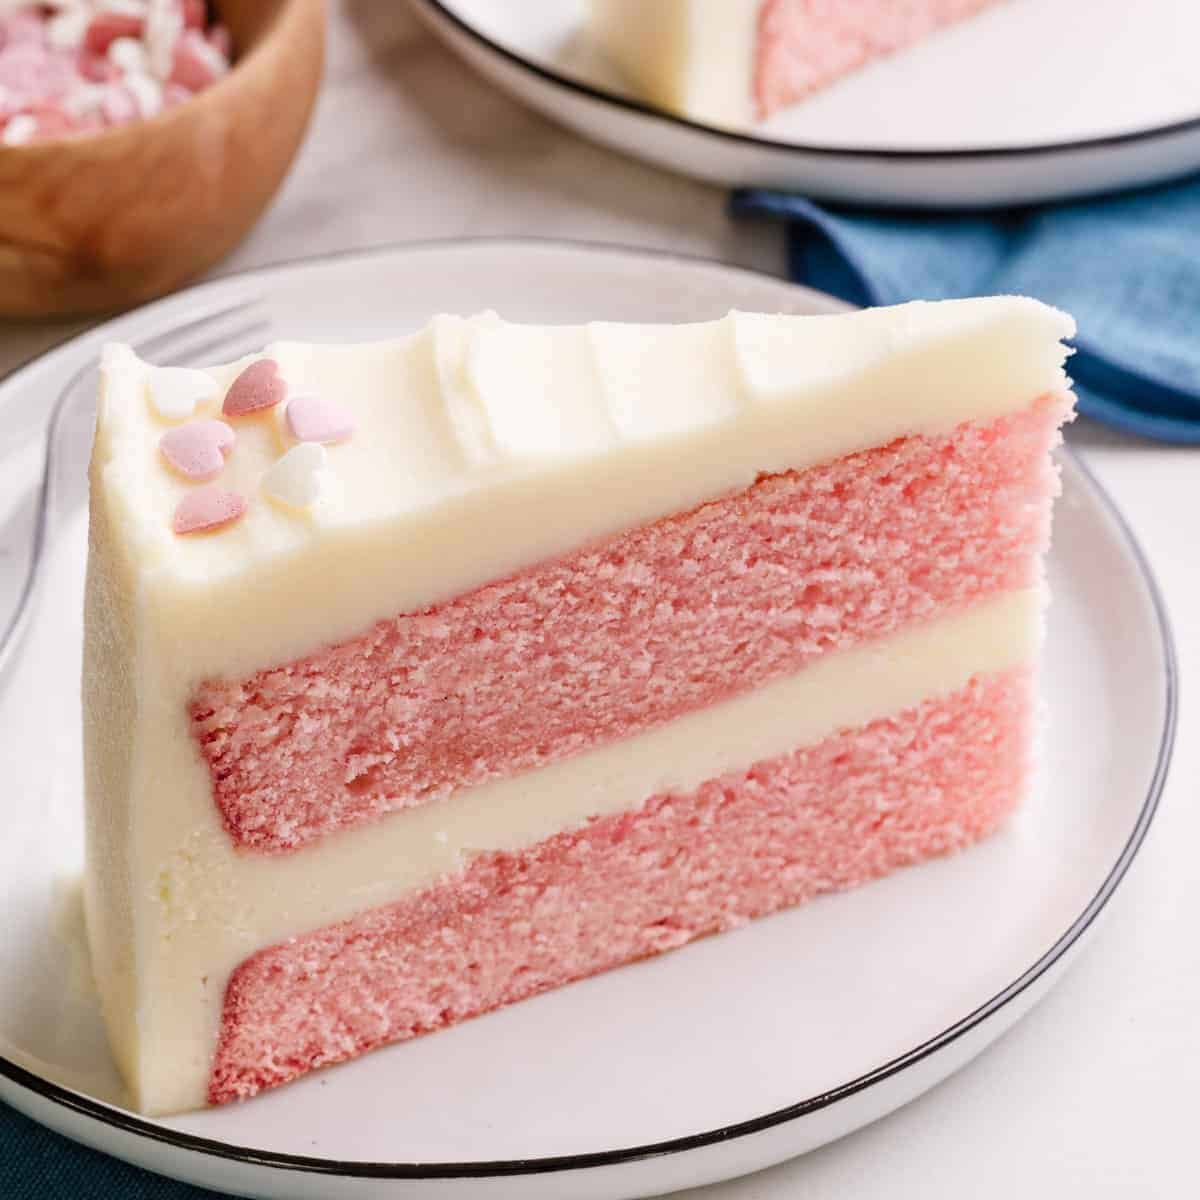 A slice of double layer pink velvet cake with buttercream frosting.